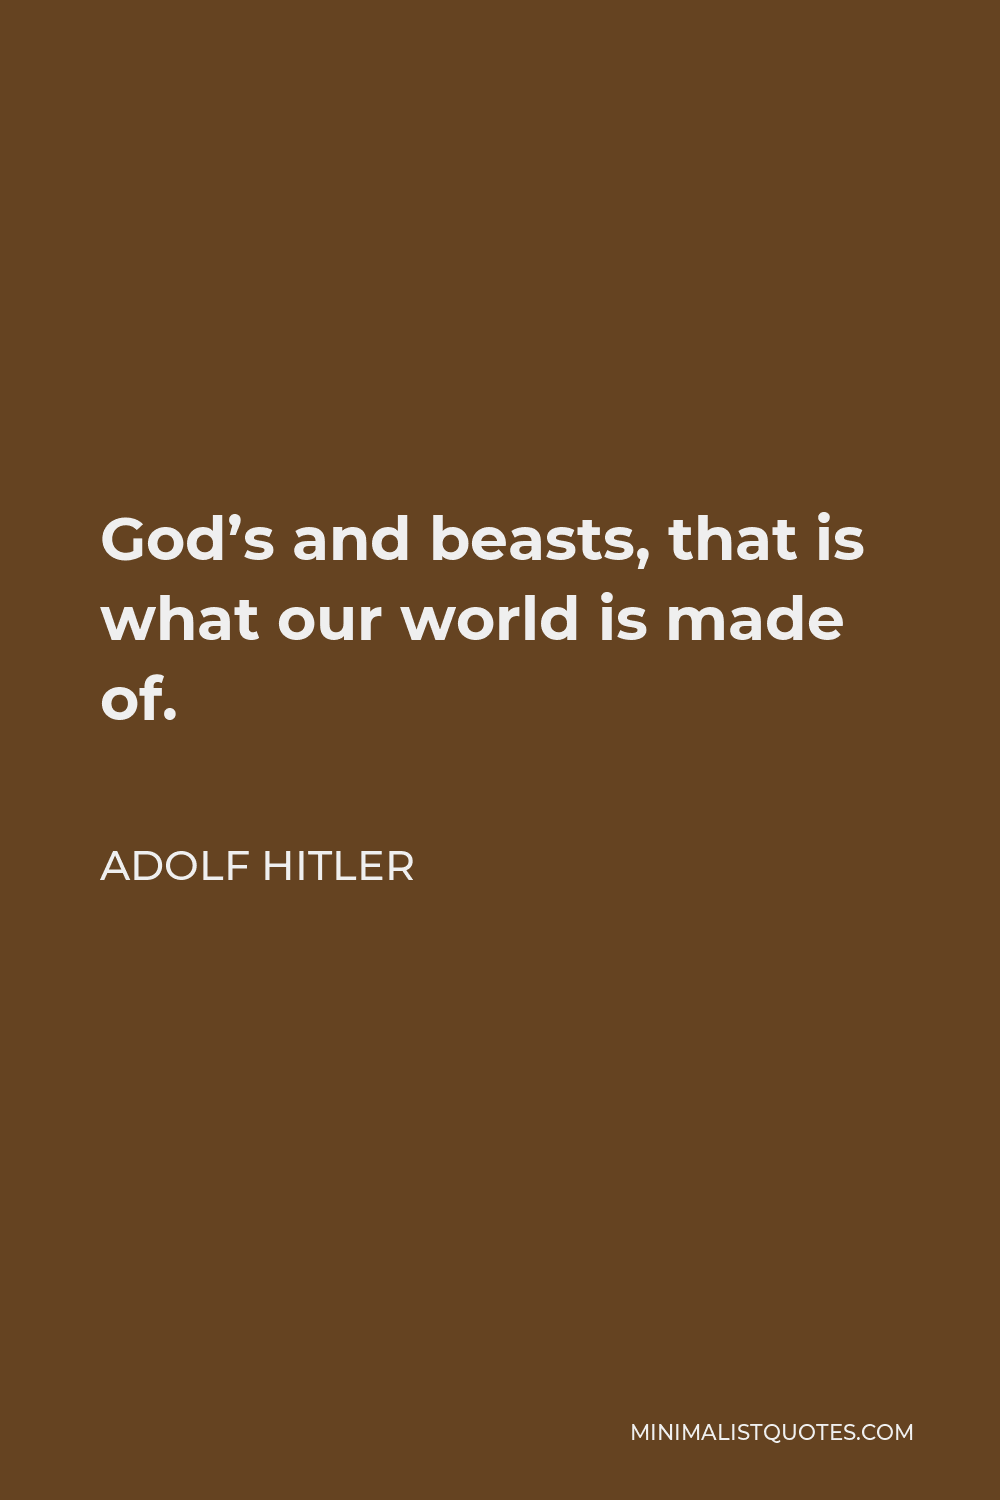 Adolf Hitler Quote - God’s and beasts, that is what our world is made of.